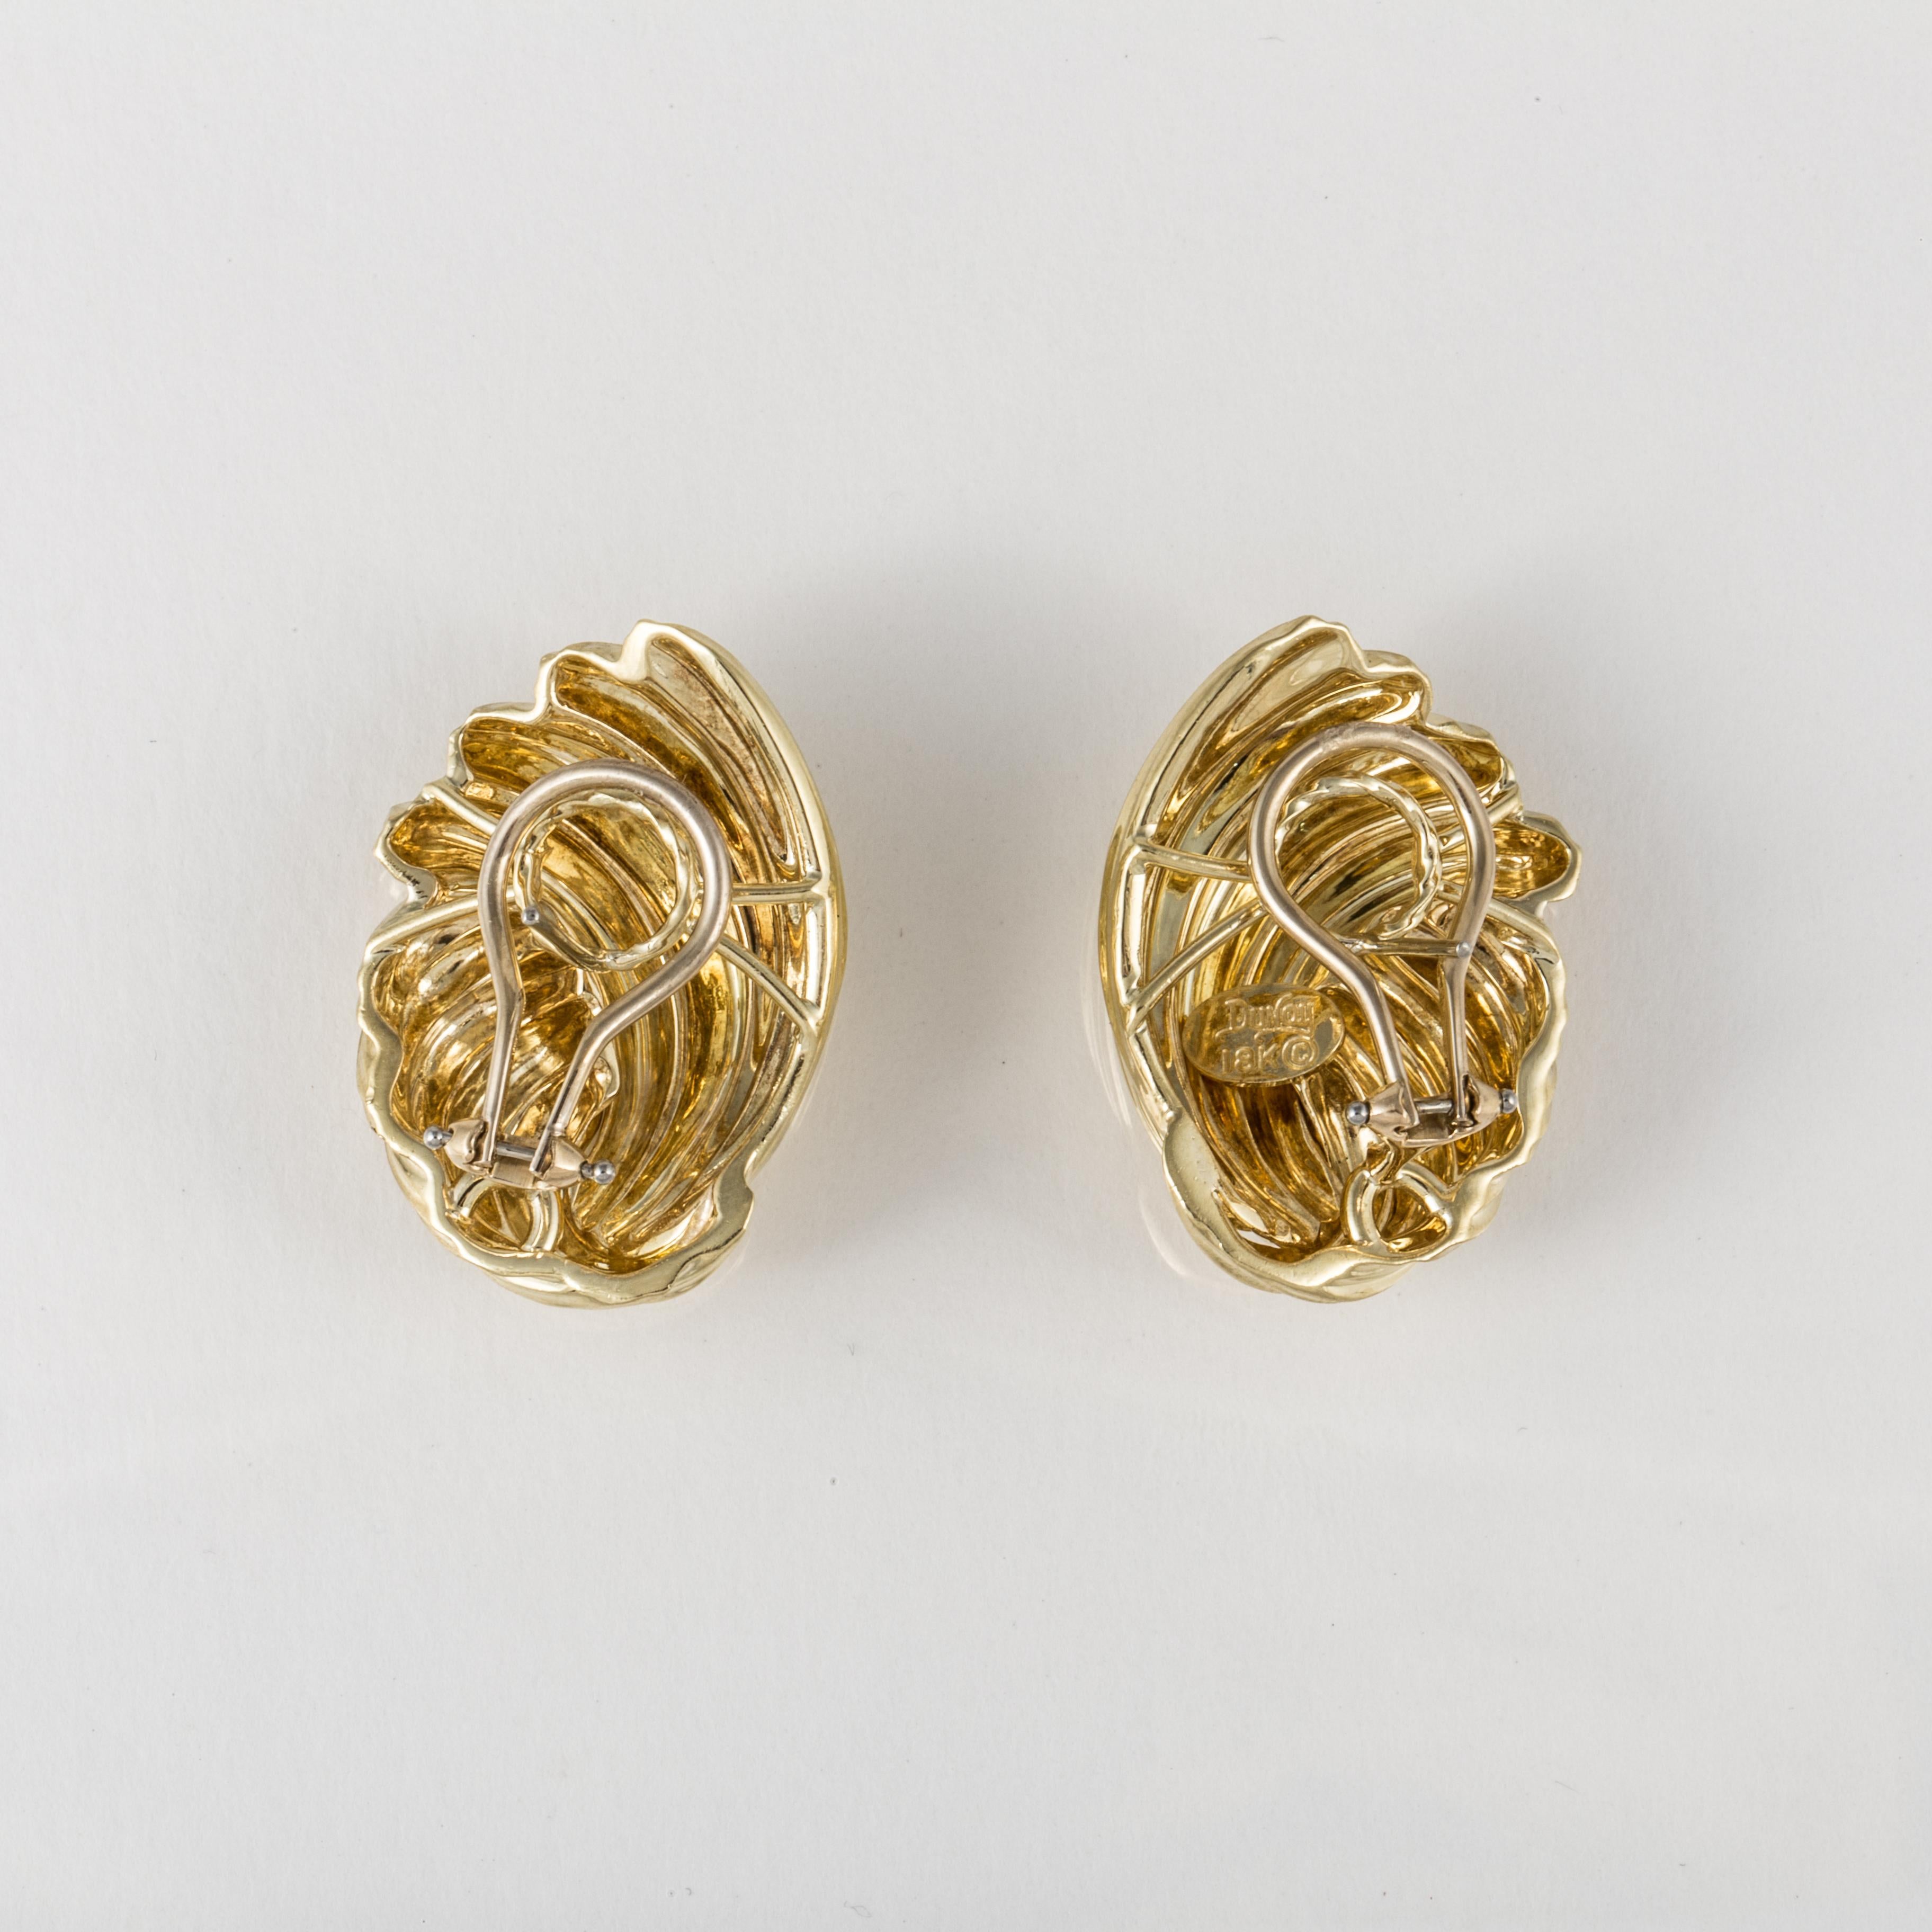 Henry Dunay earrings in 18K yellow gold with a polished finish.  They measure 1 5/16 inches long and 7/8 inches wide.  These are for pierced ears with a post and lever back.